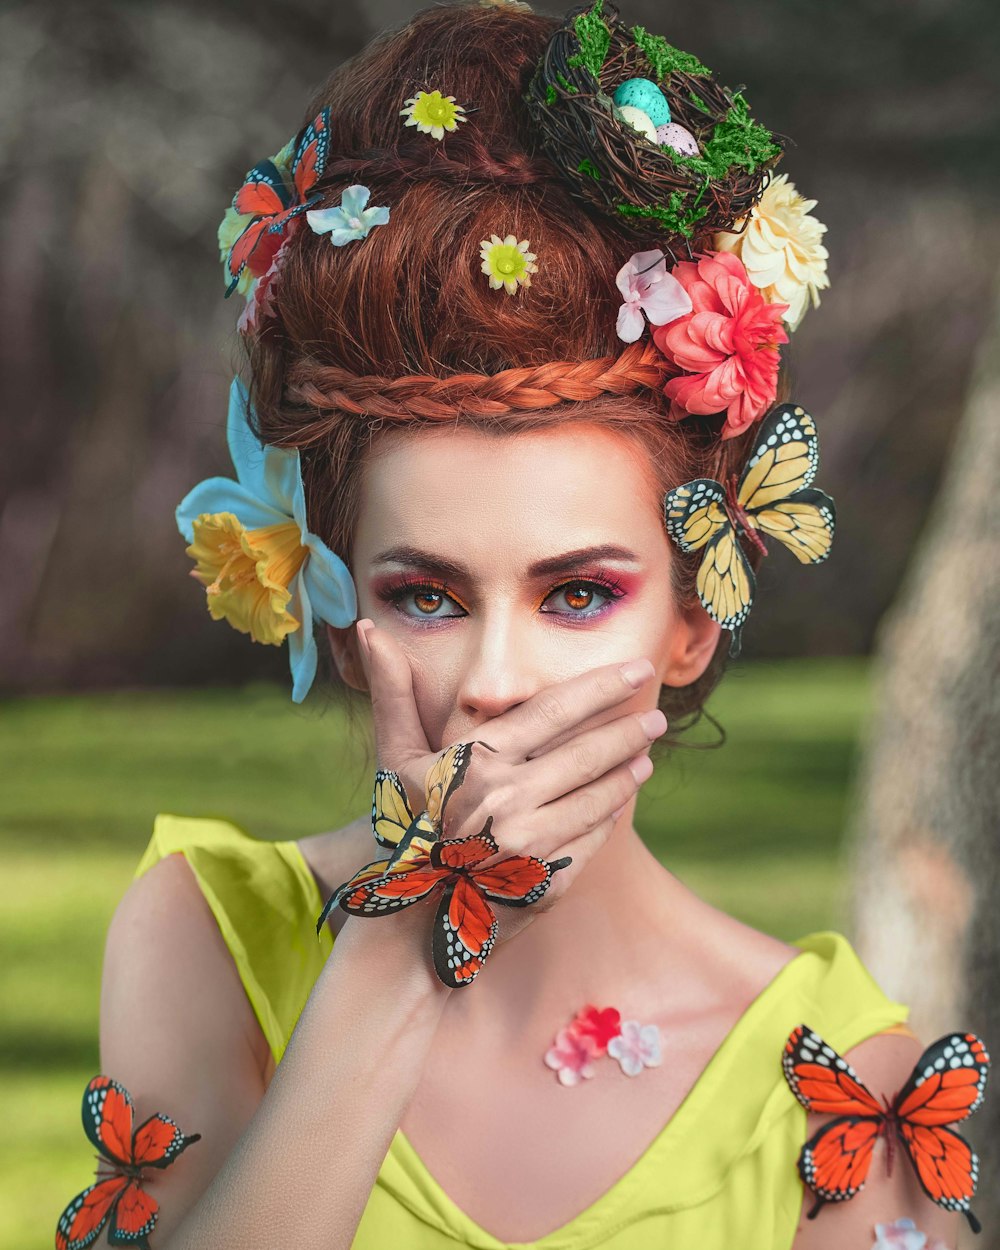 woman in yellow and red floral dress with orange flower headdress